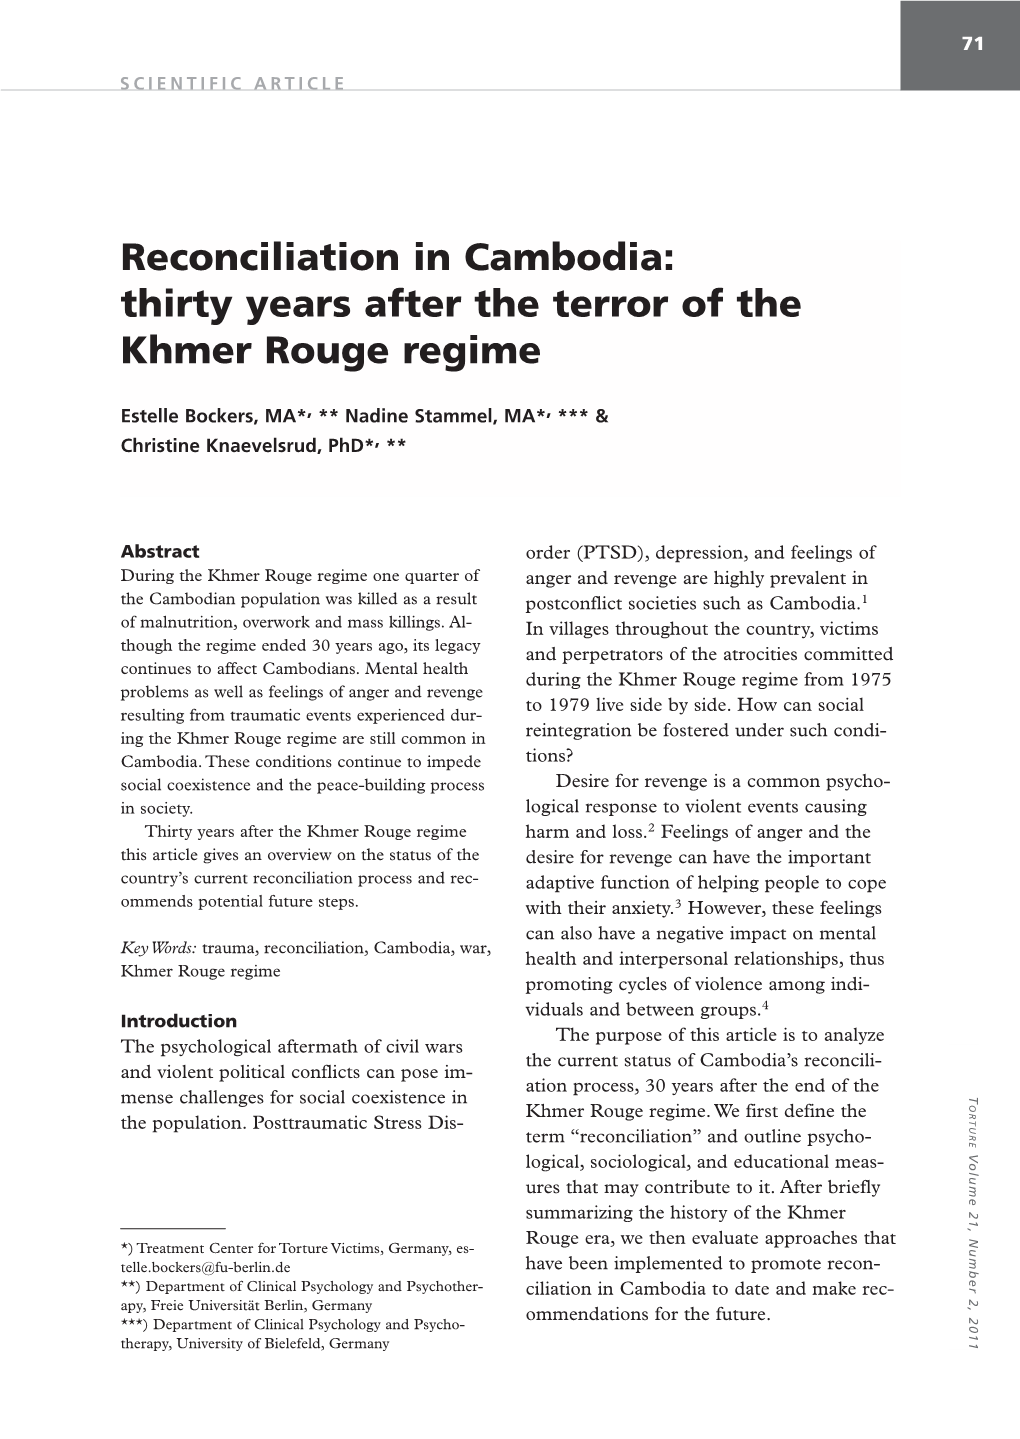 Reconciliation in Cambodia: Thirty Years After the Terror of the Khmer Rouge Regime